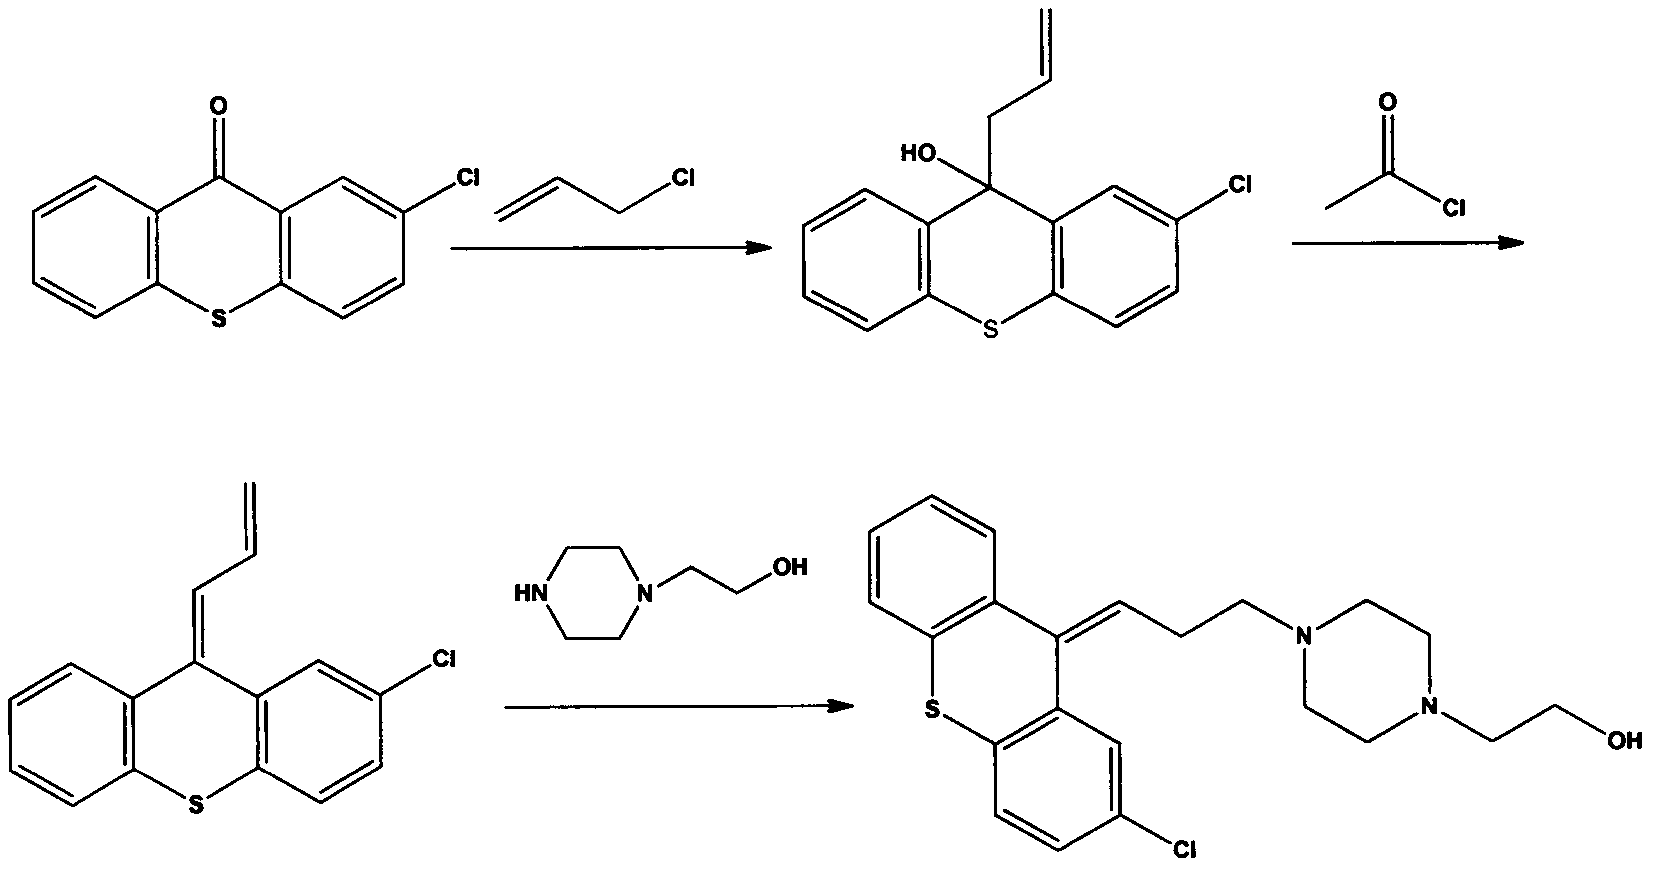 Separation and purification method of zuclopenthixol